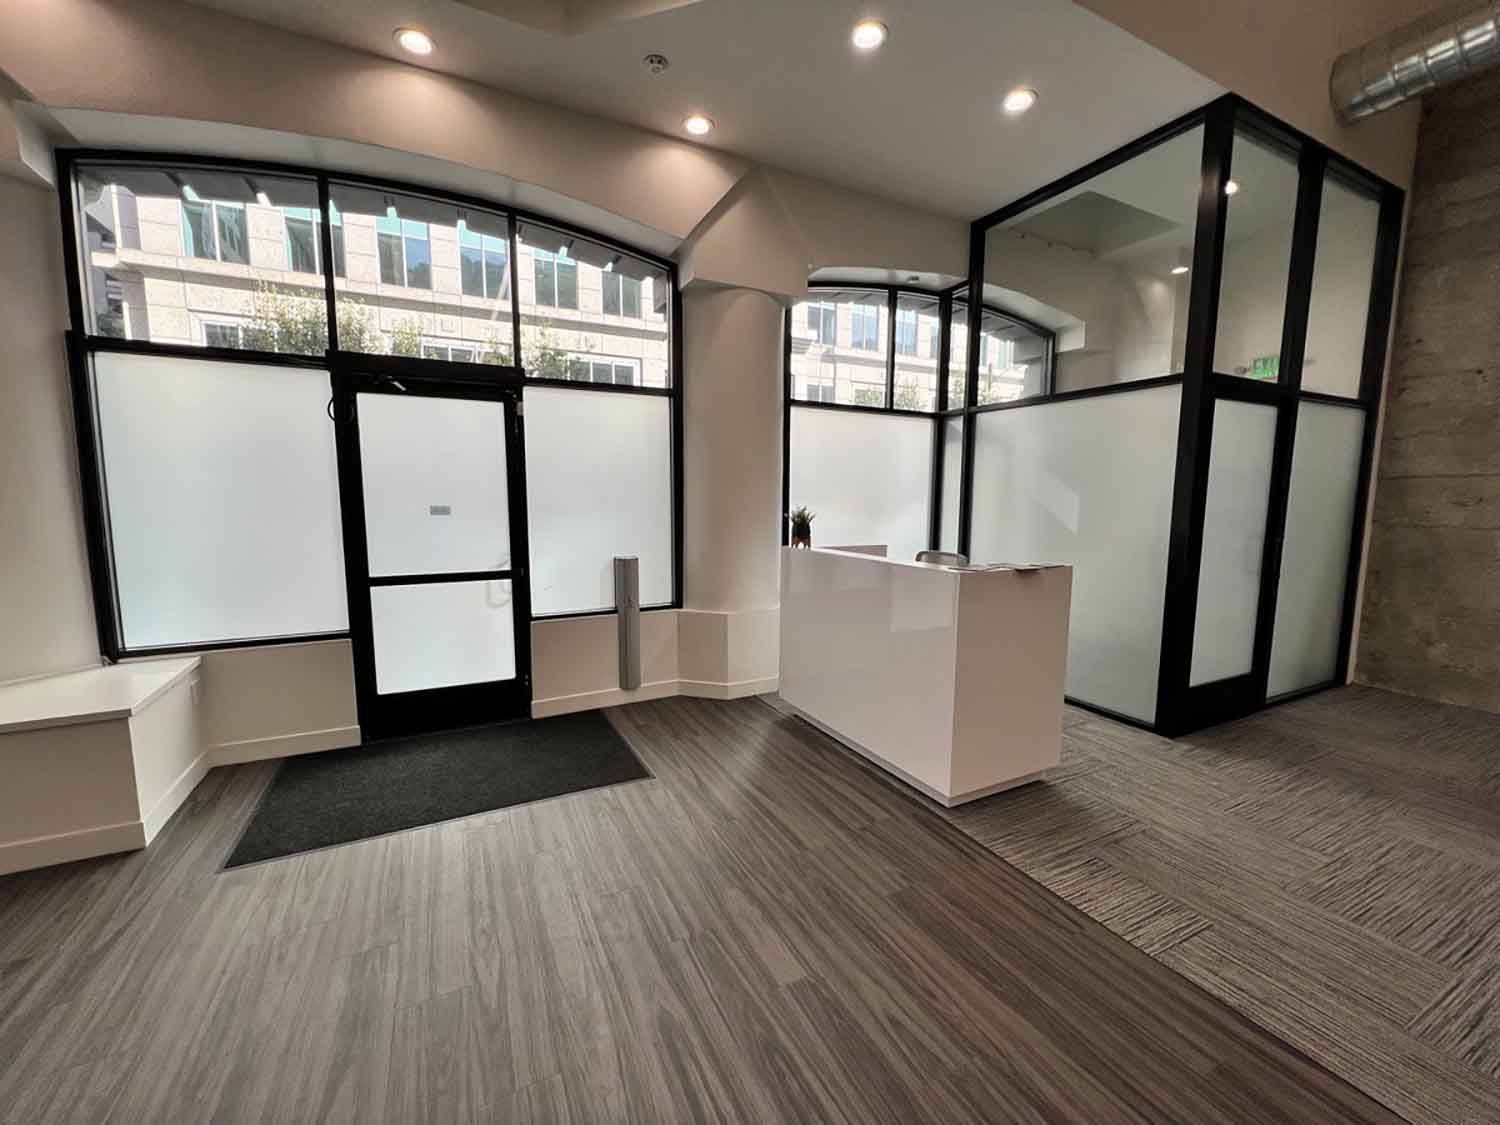 ClimatePro Installs Privacy Window Film for Offices in San Francisco, CA